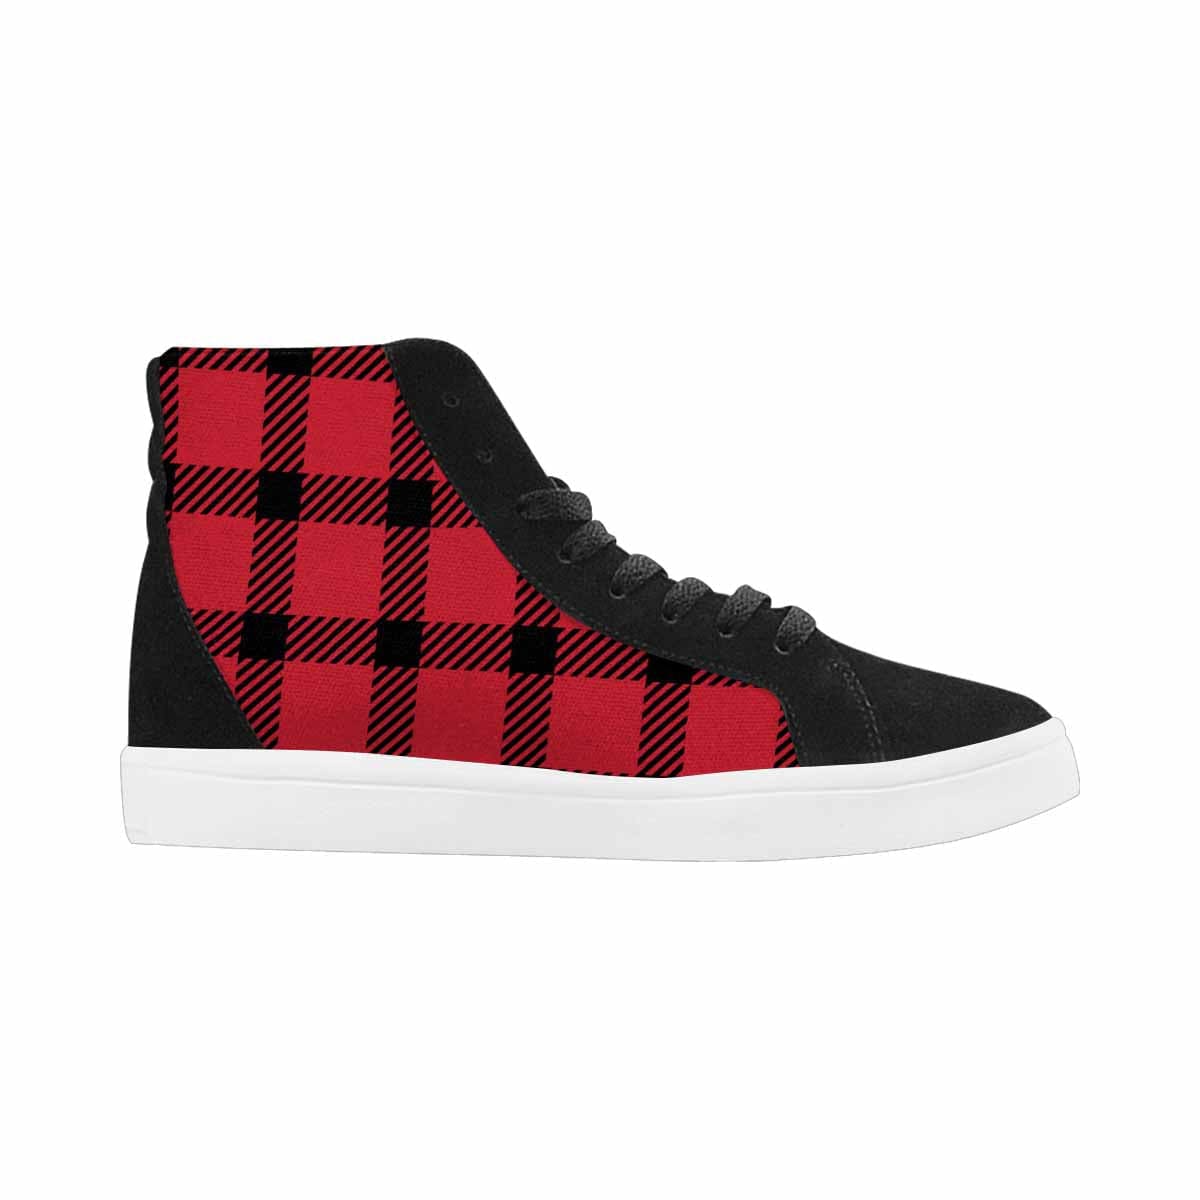 Sneakers For Women, Buffalo Plaid Red And Black - High Top Sports Shoes-0